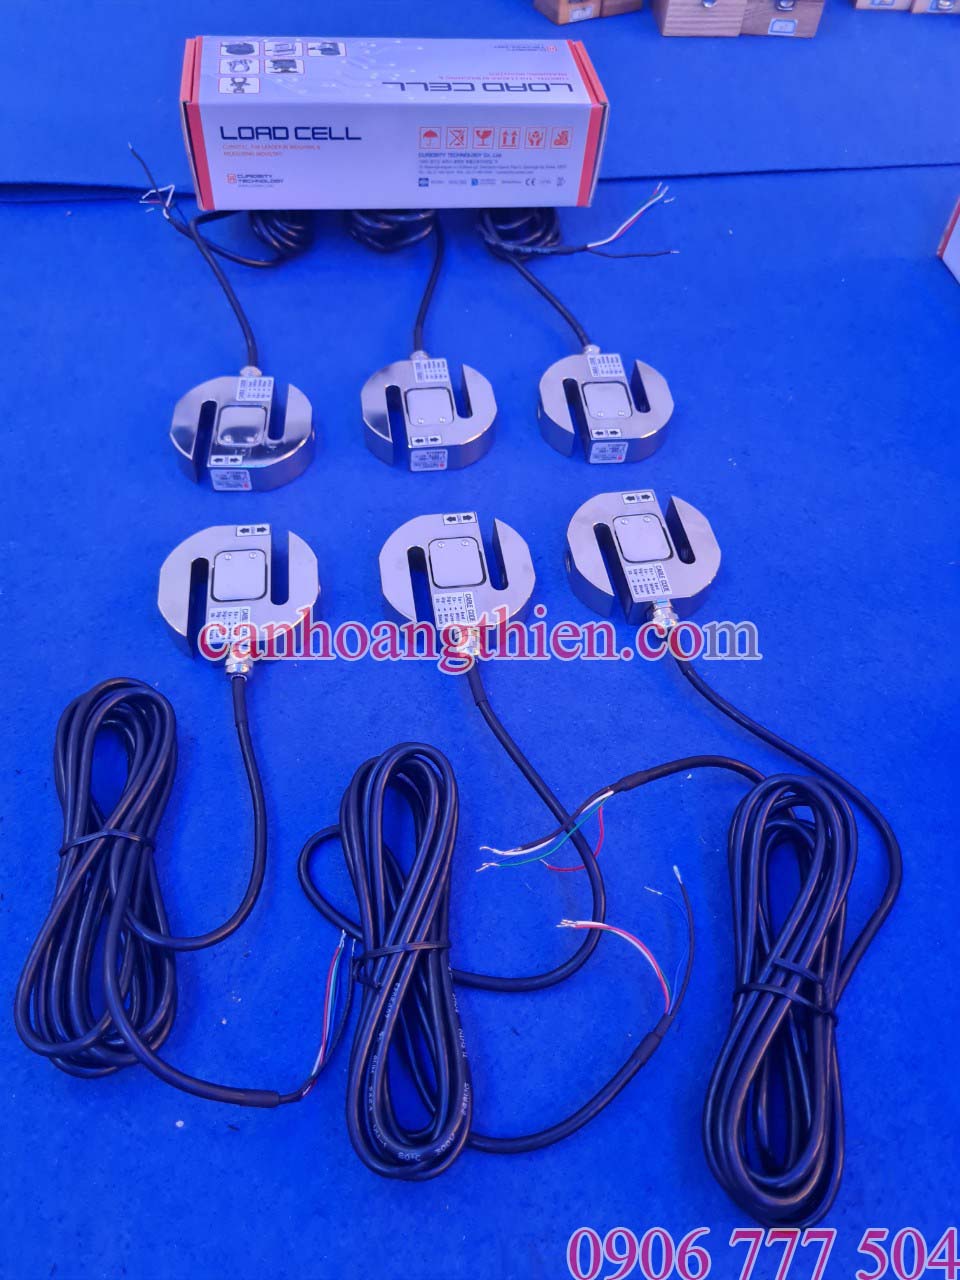 loadcell-curiotec-ls300-gia-re-tphcm.jpg